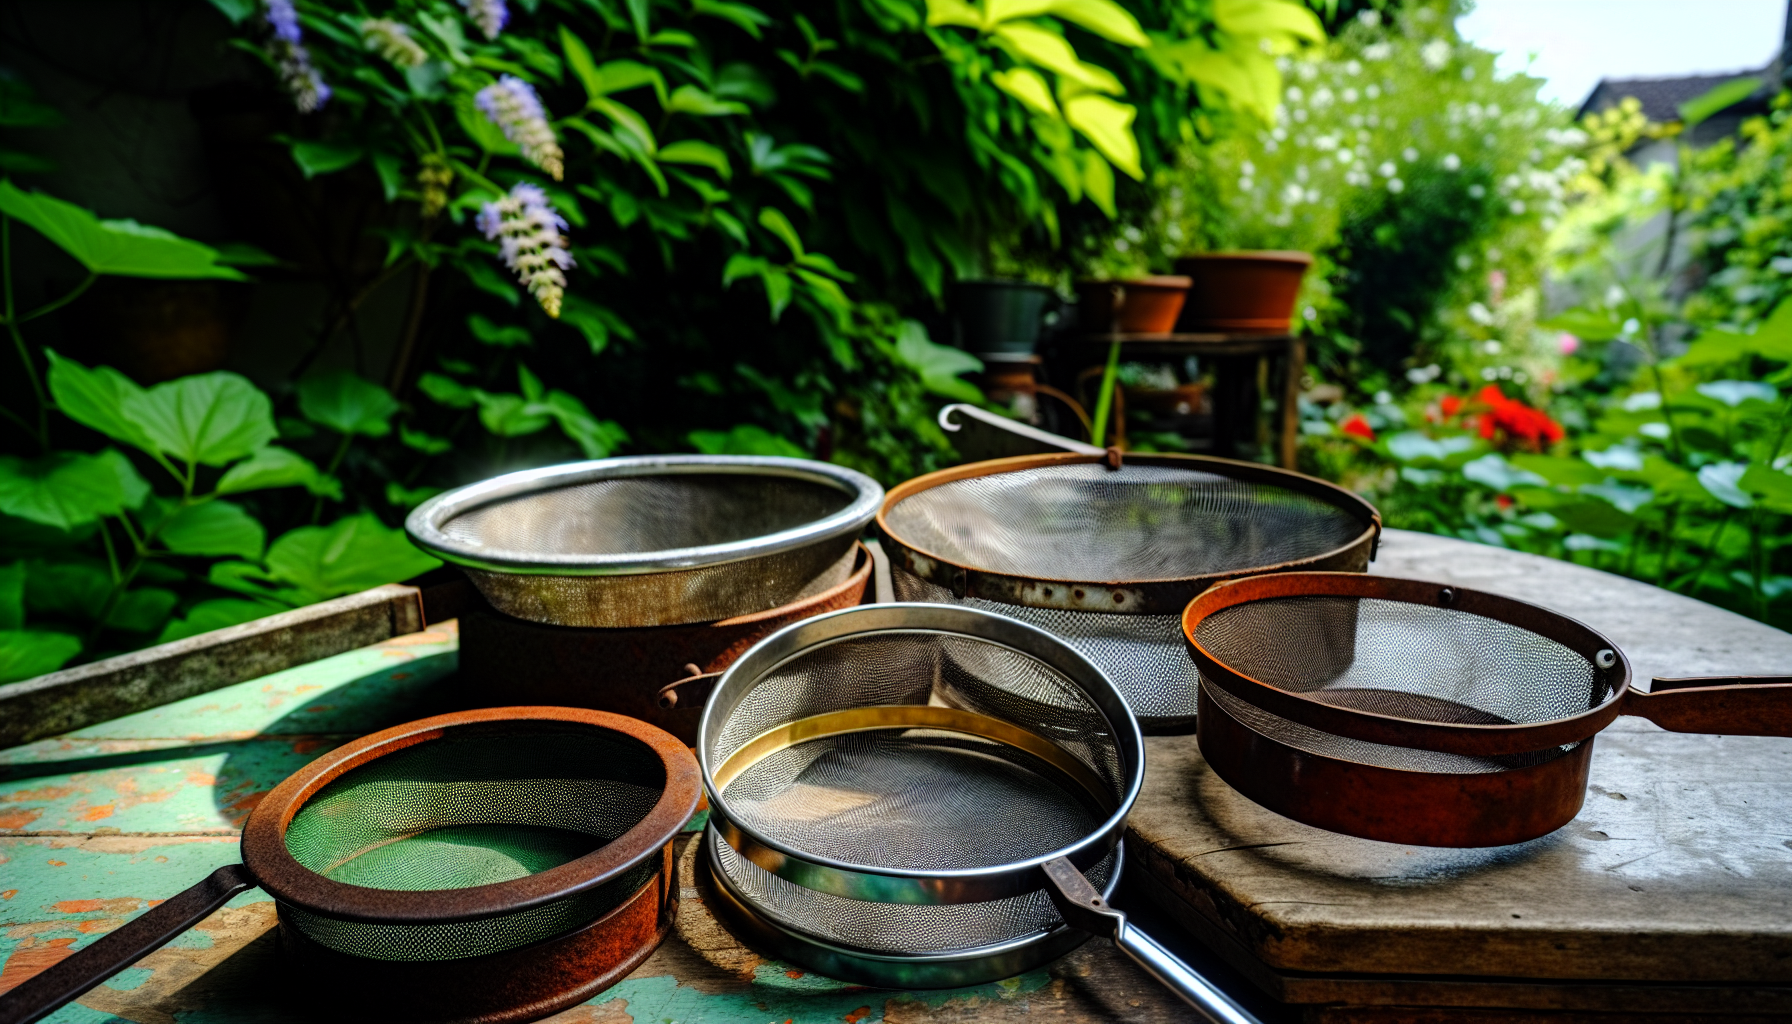 Various garden sieves displayed on a table